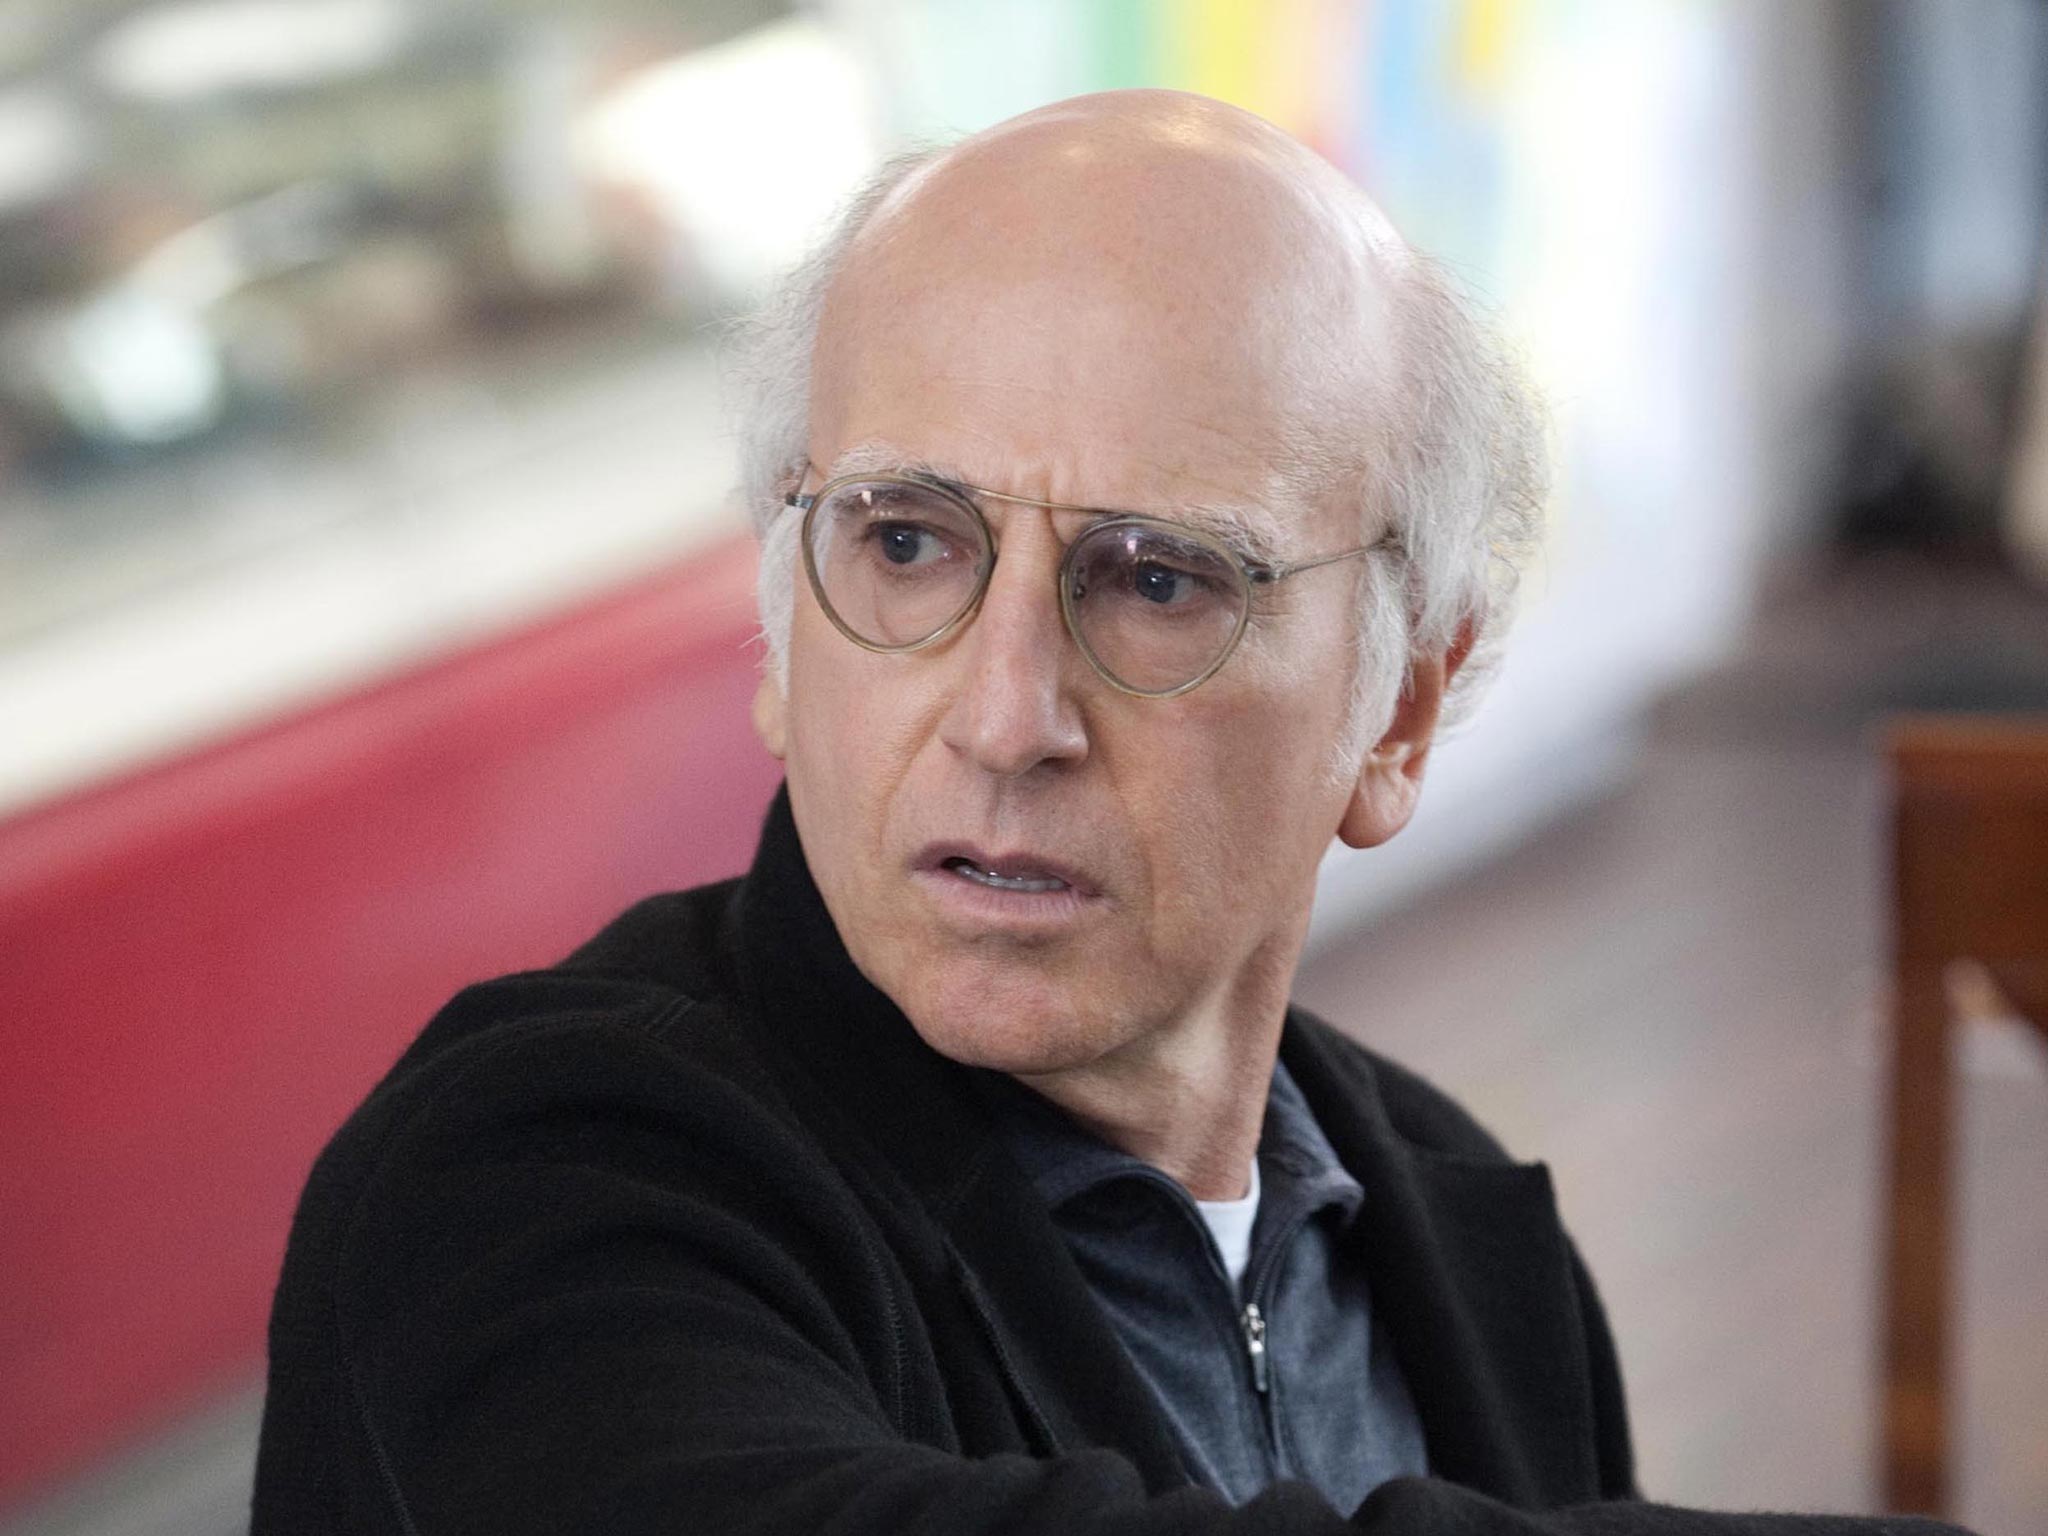 Enthusiasm curbed: irritable types such as Larry David are apparently not helping themselves